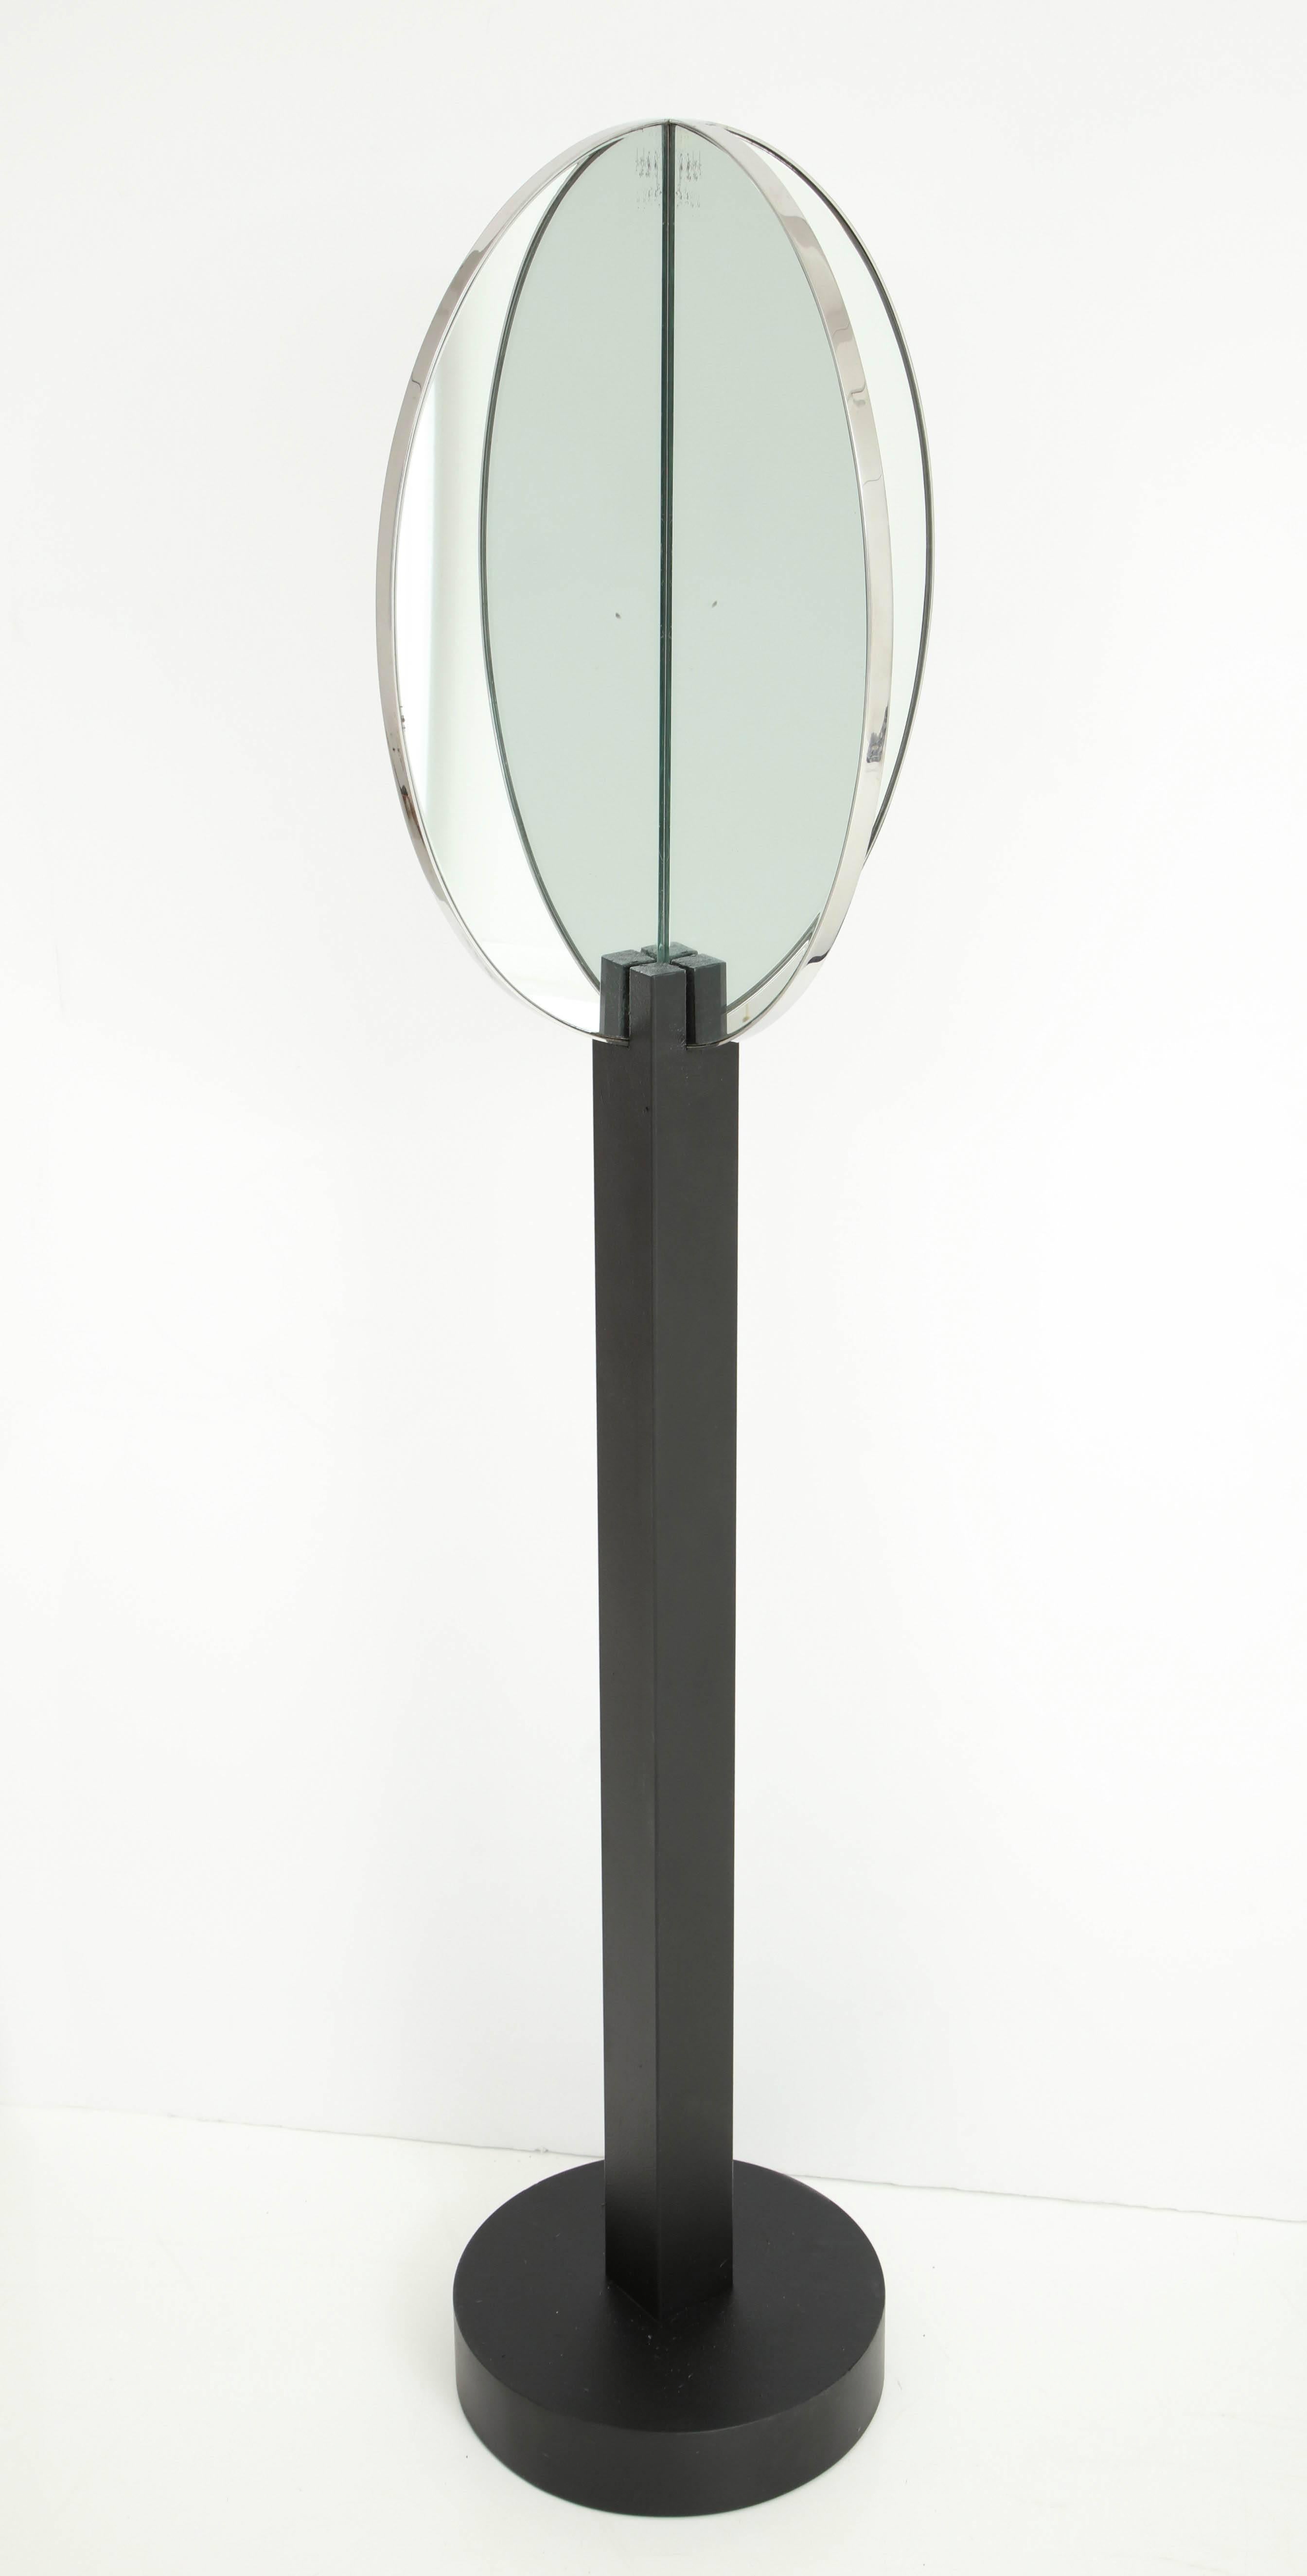 The 1980s standing floor mirror was designed by NYC Avant Garde window dresser Robert Currie for Henri Bendel's 57th street store.
The Minimalist stand supports a three part mirror divided into two quarter sections and one halve section.
 